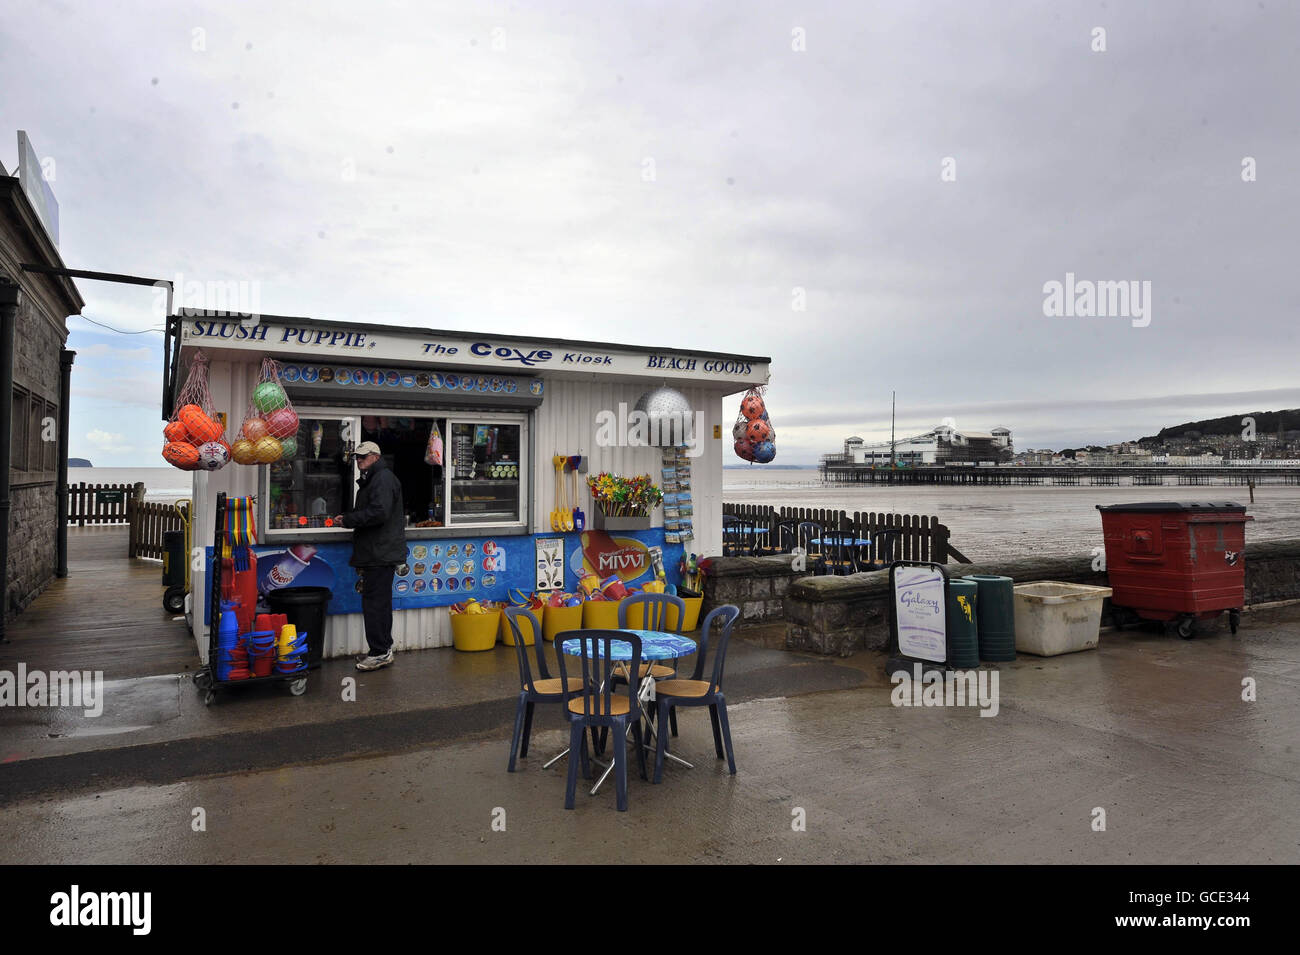 A man waits to be served at The Cove Kiosk on the promenade in Weston-super-Mare, Somerset. Stock Photo